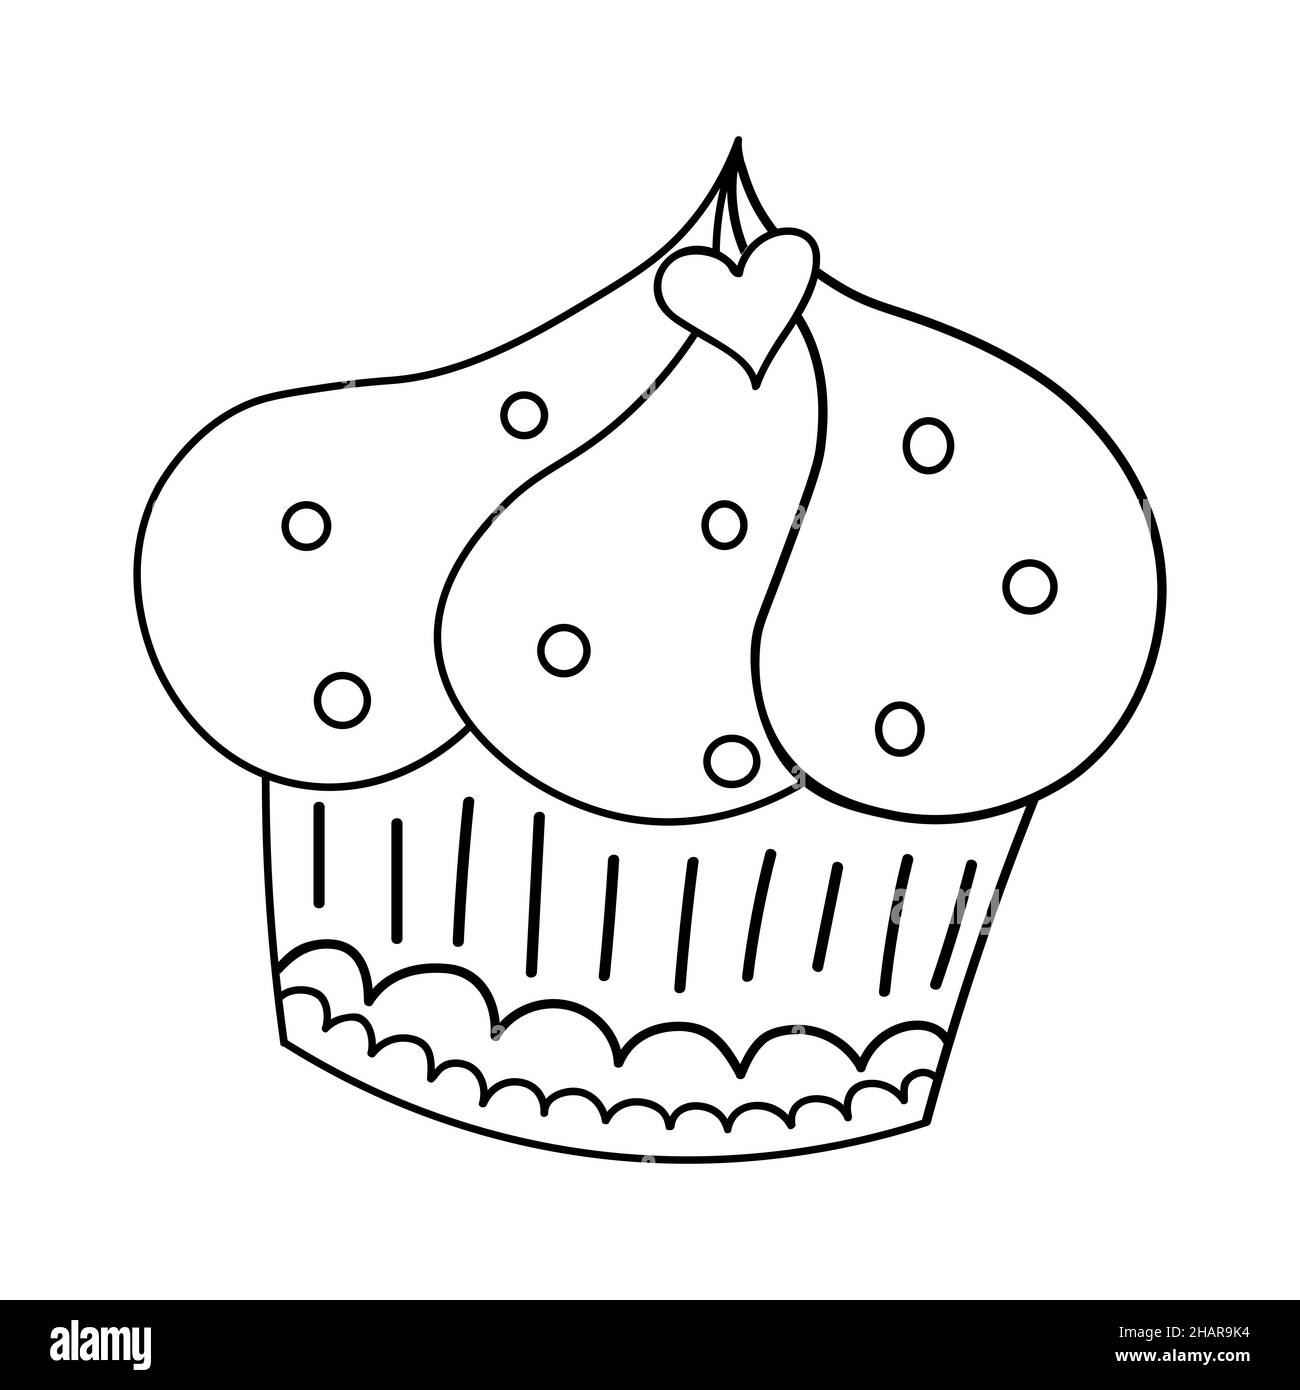 Cupcake with heart hand drawn. Birthday postcard. Vector illustration in doodle style isolated on background. Happy Valentines Day decoration element. Stock Vector